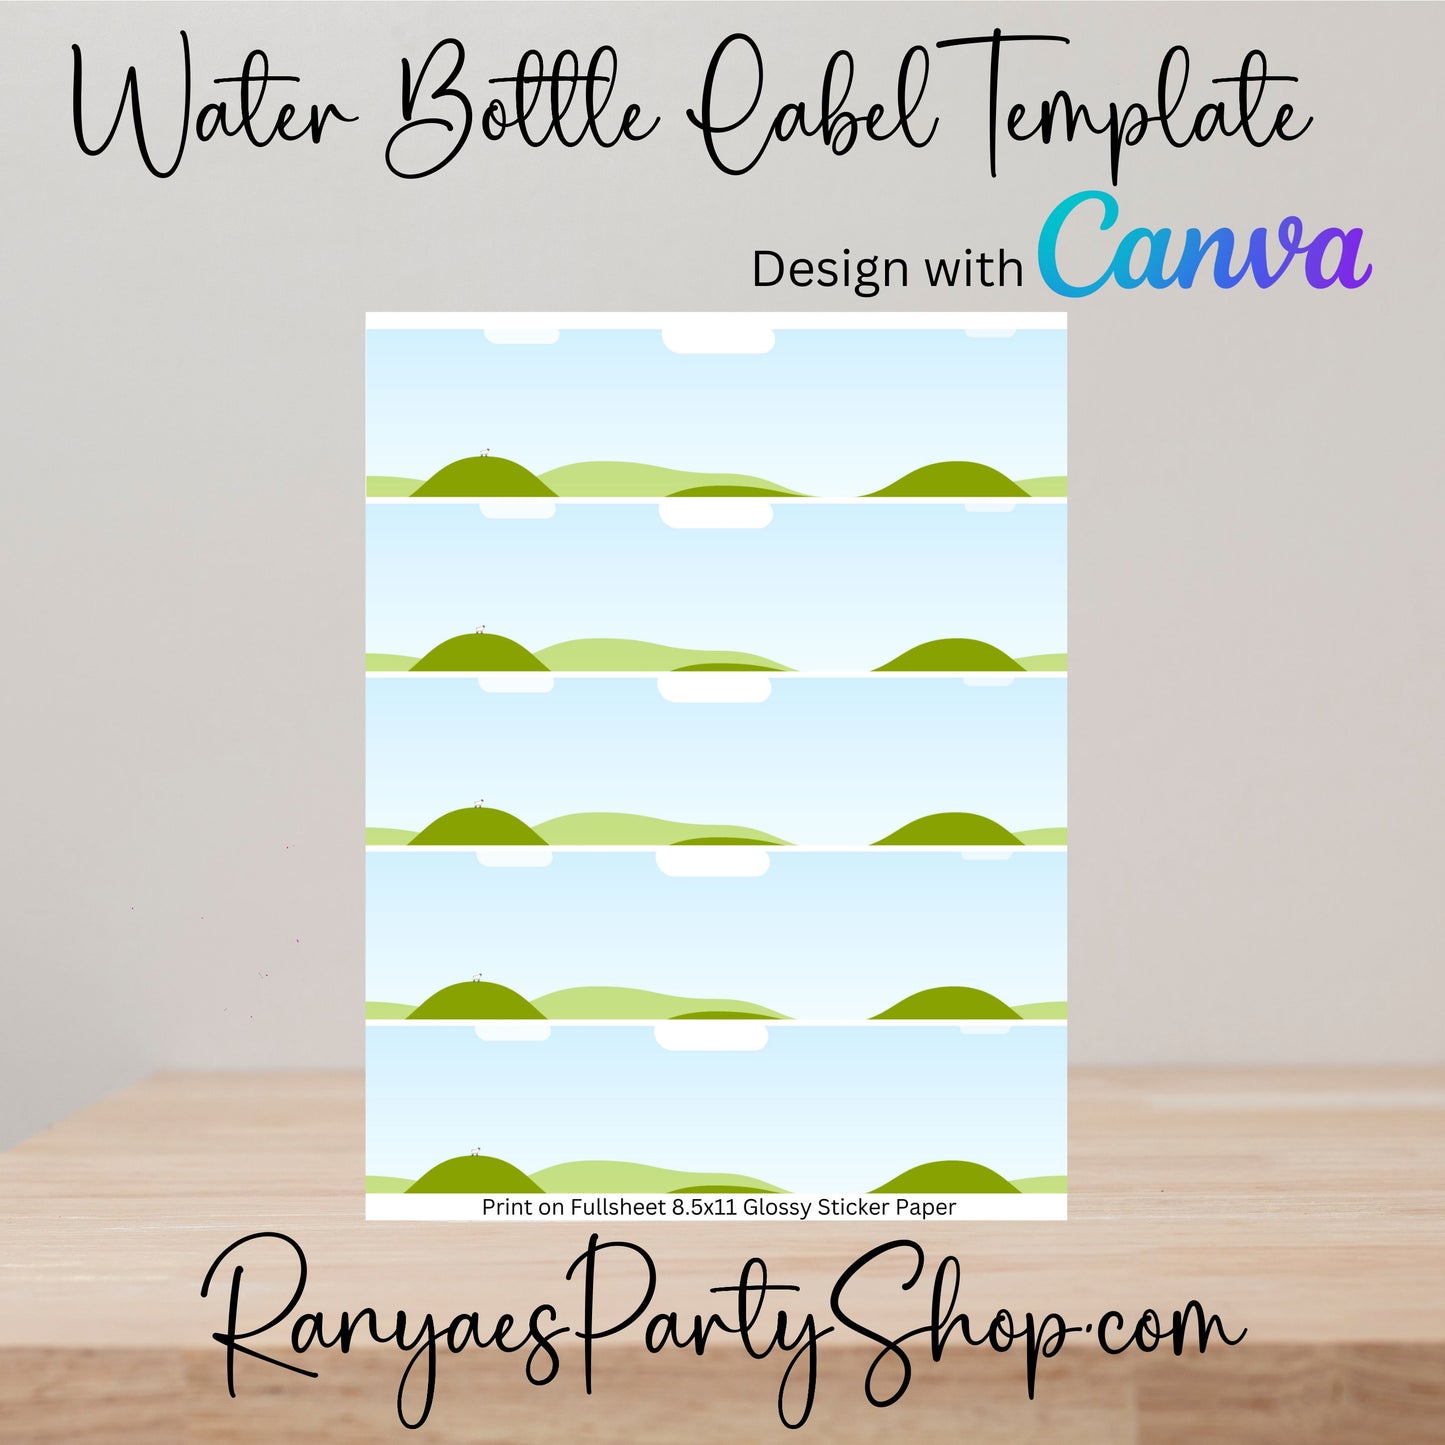 Water Bottle Label Template | Create Your Own Water Bottle Labels | Blank Templates | You Design | Design with Canva | Canva Template